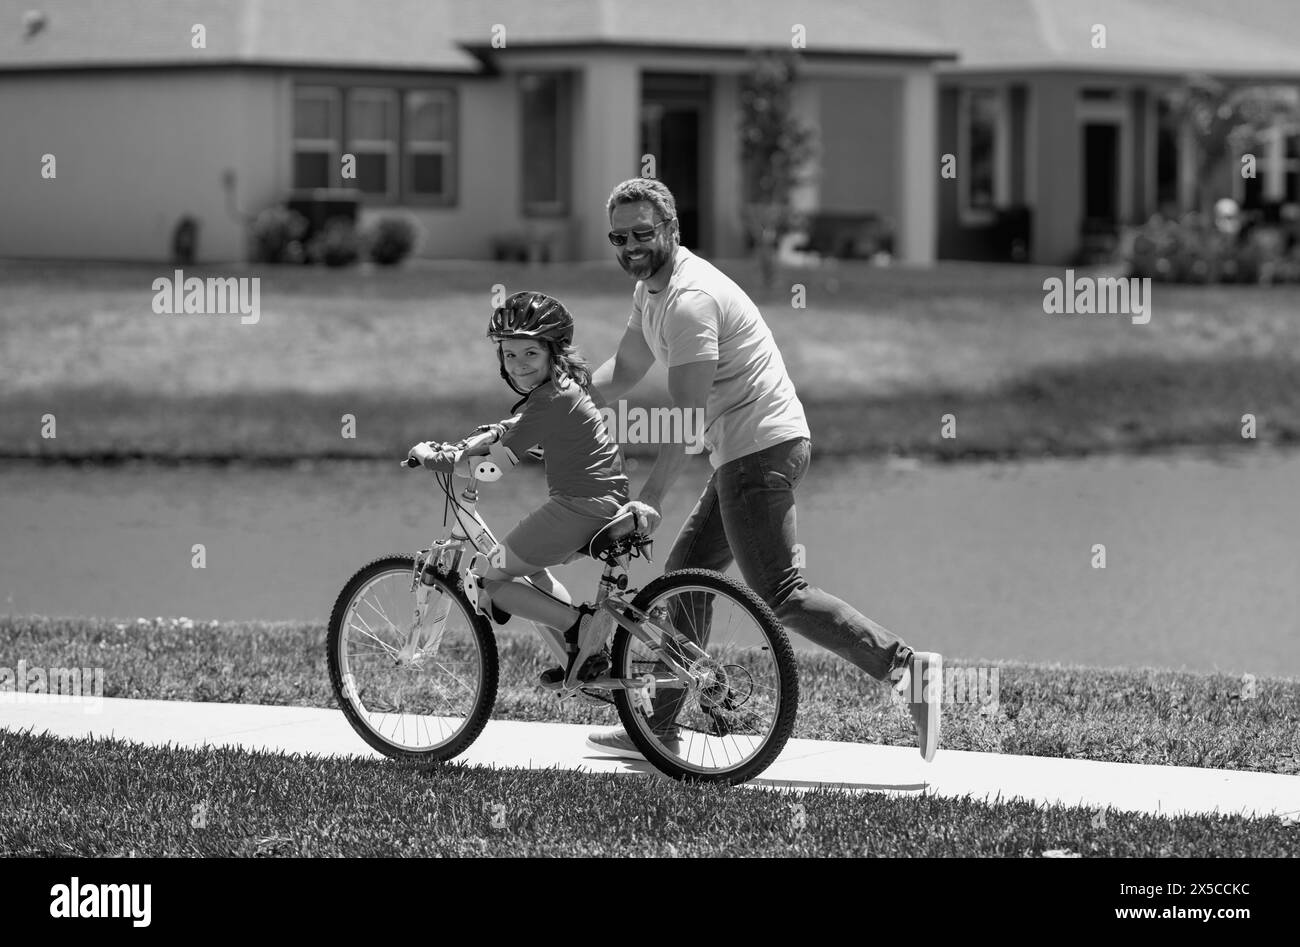 Father and son in a helmet riding bike. Little cute adorable caucasian boy in safety helmet riding bike with father. Family outdoors summer activities Stock Photo